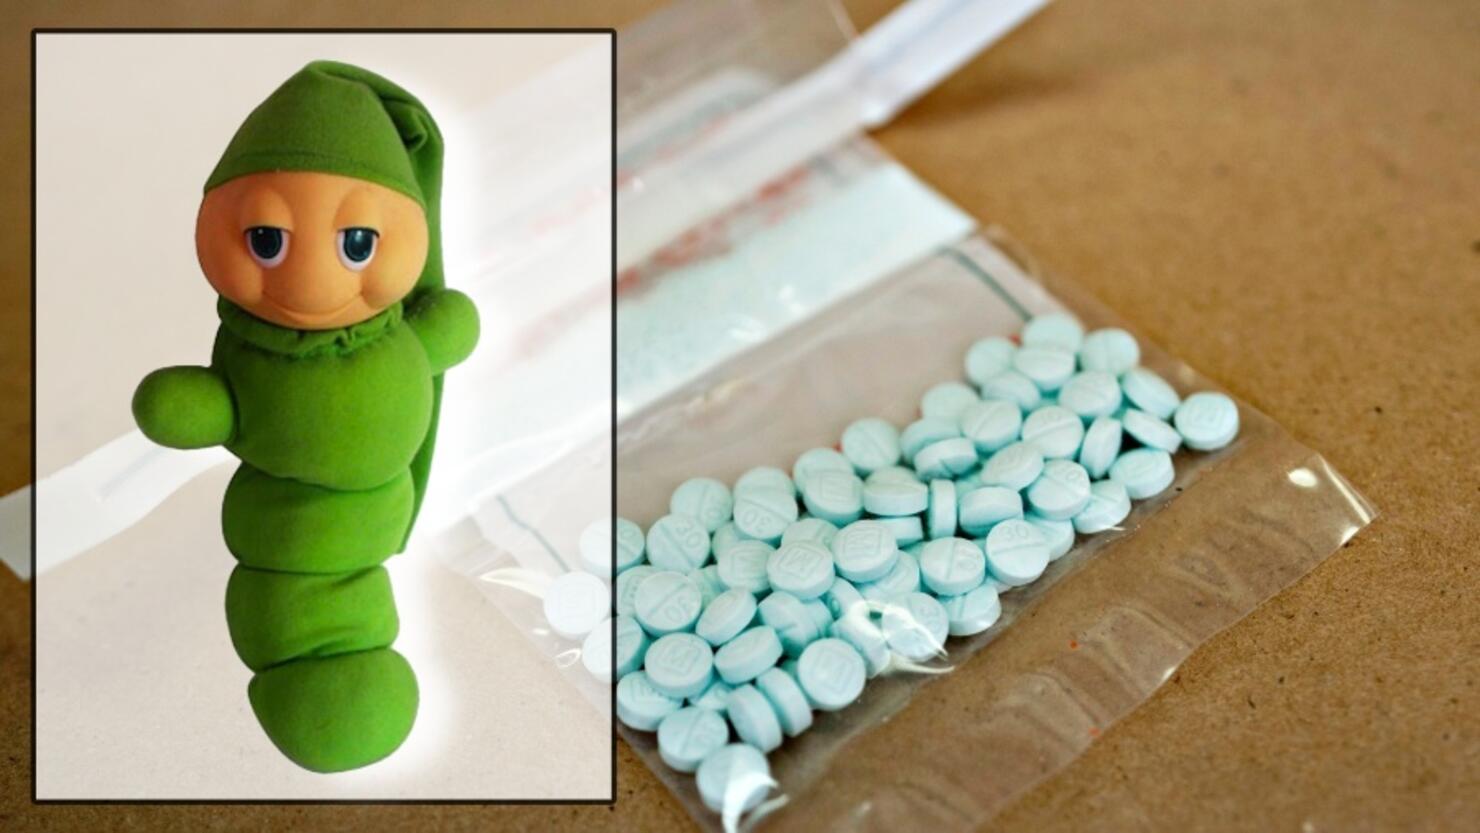 Phoenix parents find drugs stashed in child's toy